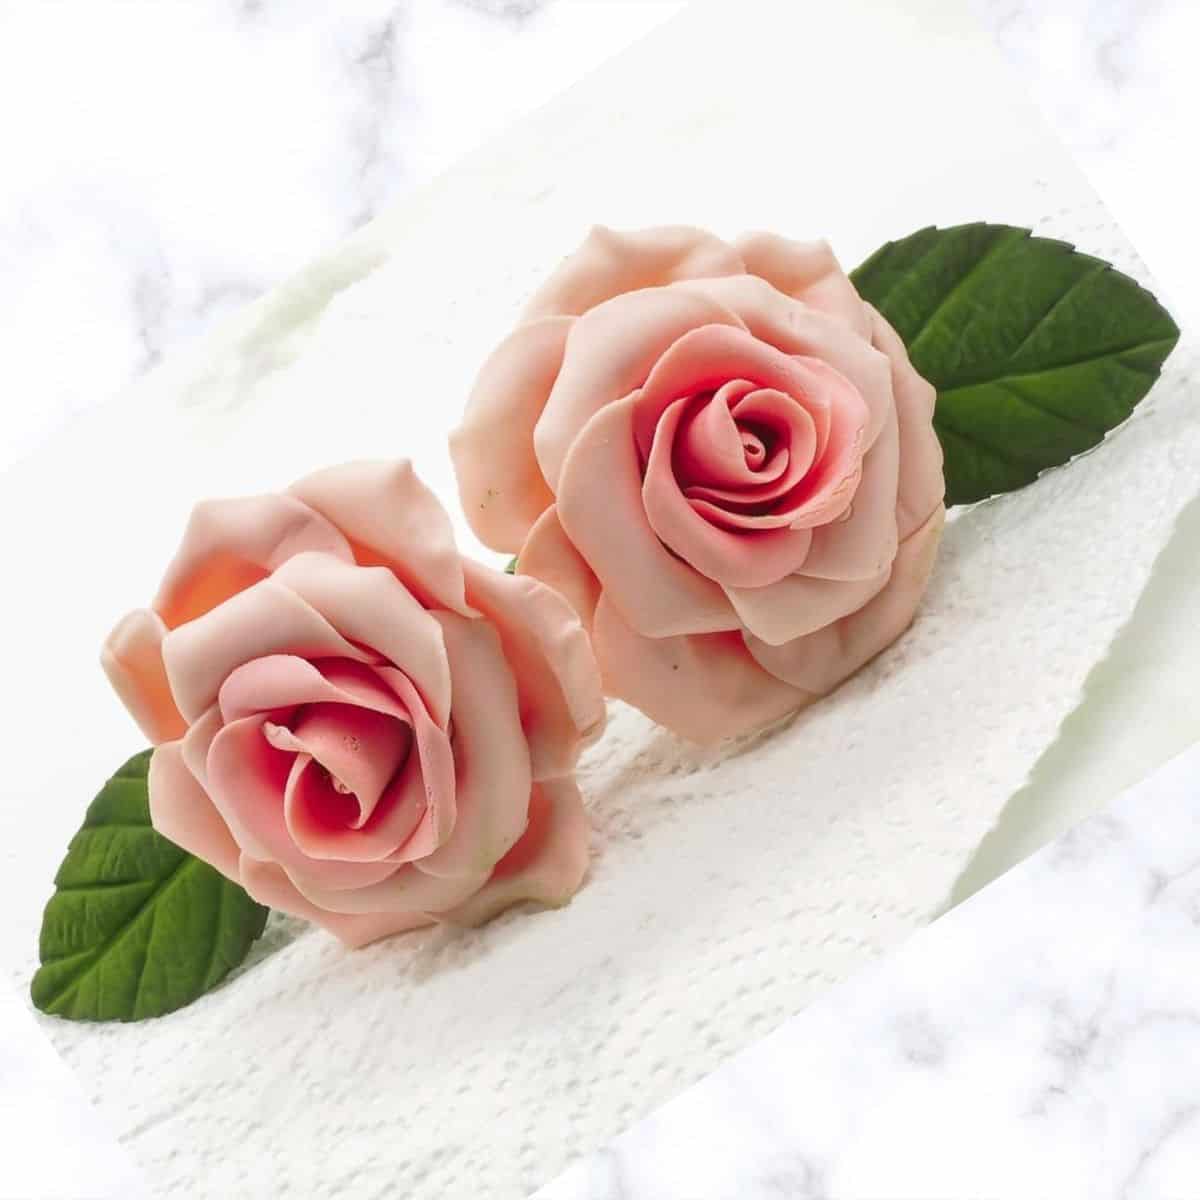 2 pink gum paste roses against a marble background